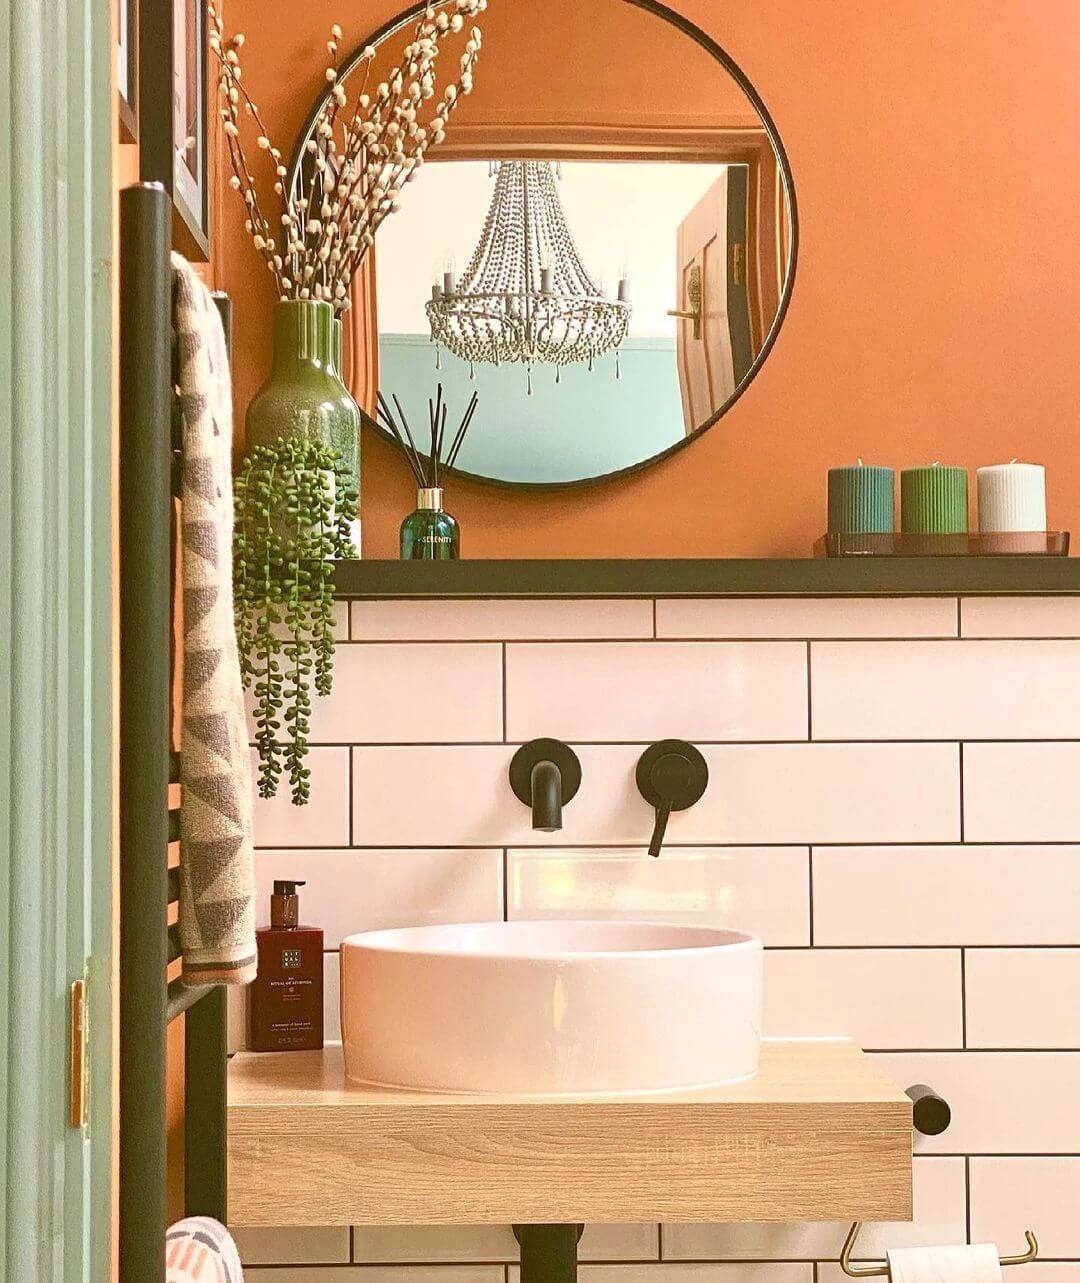 The best coastal blue paint colors for the bathroom - Green With Decor